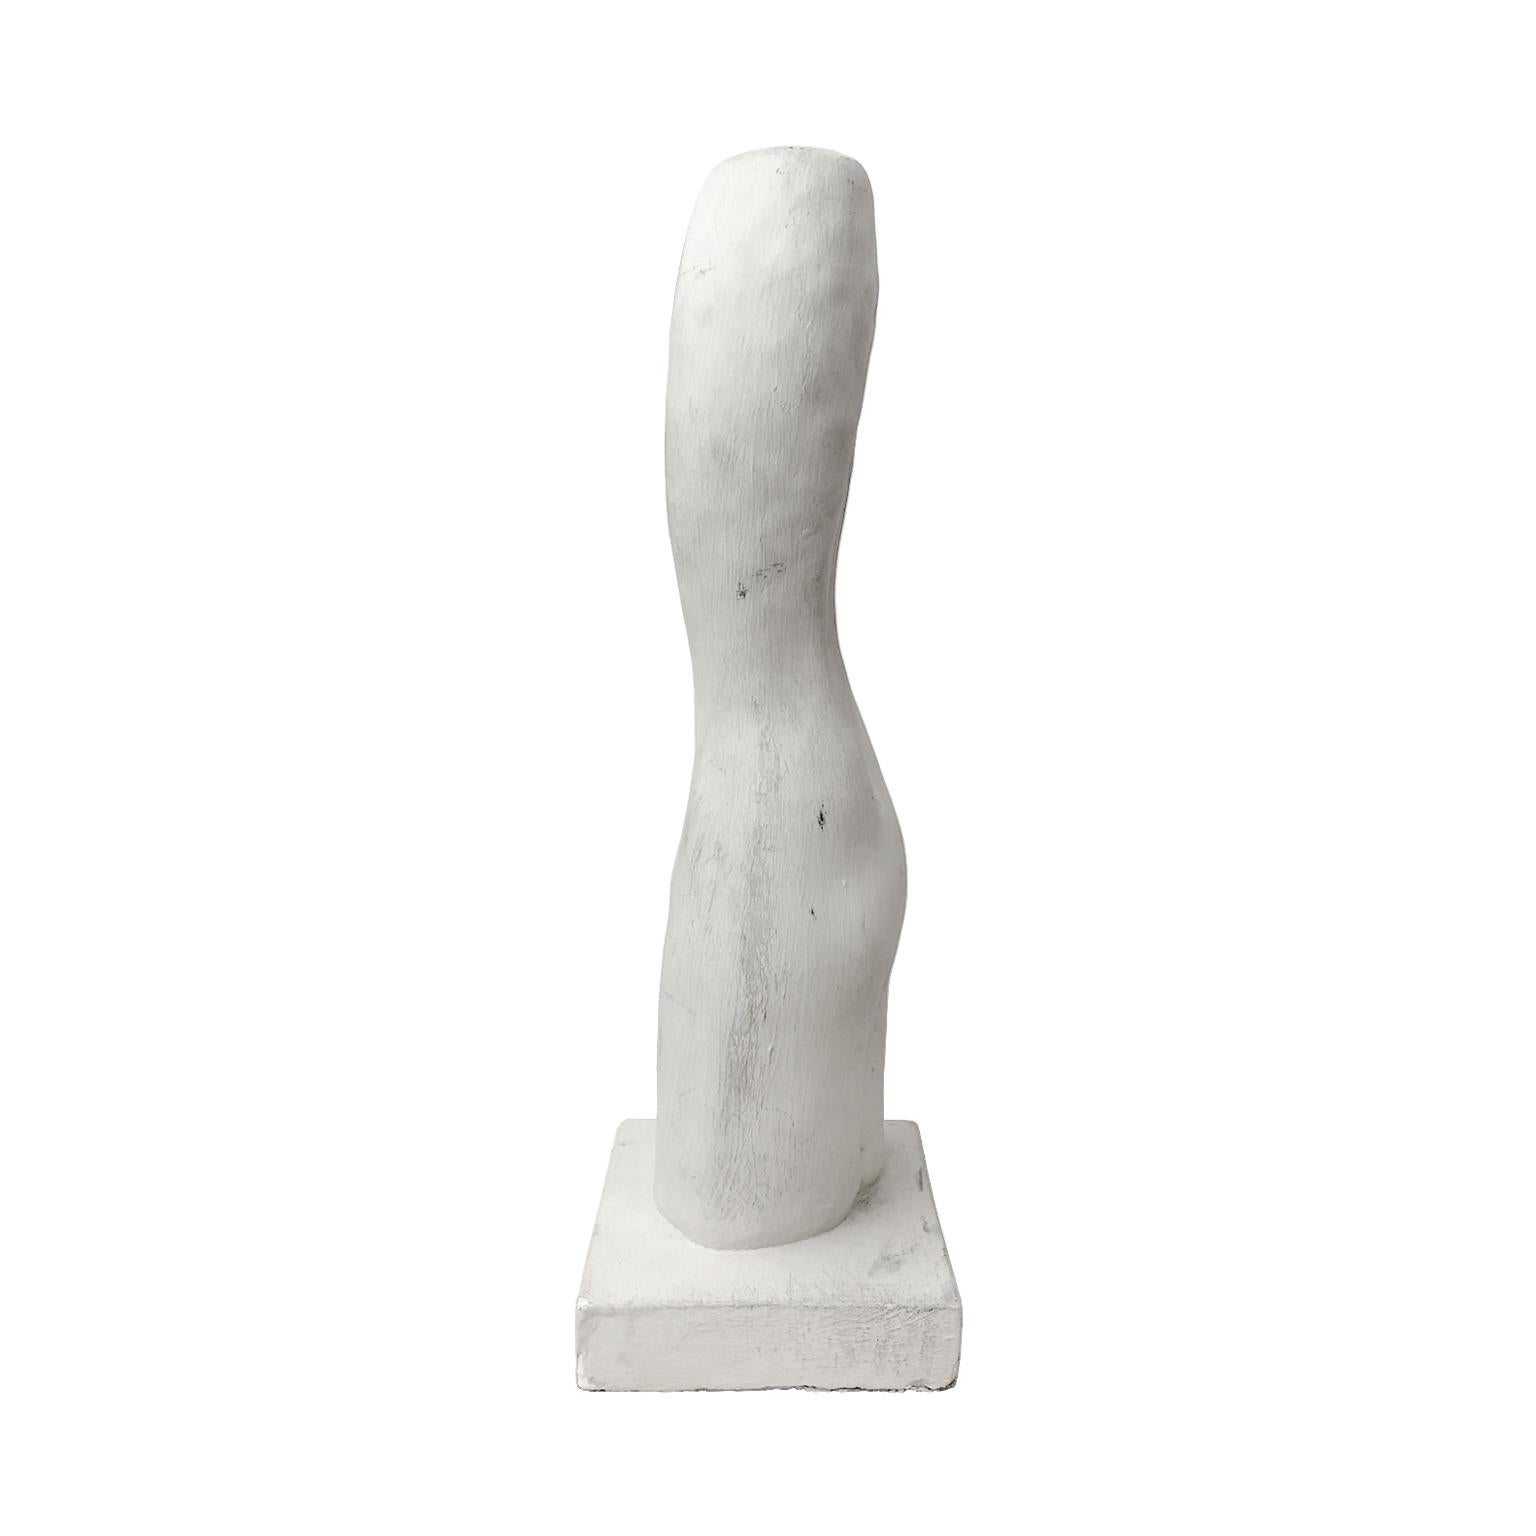 Abstract plaster female torso sculpture, USA, 1970s.